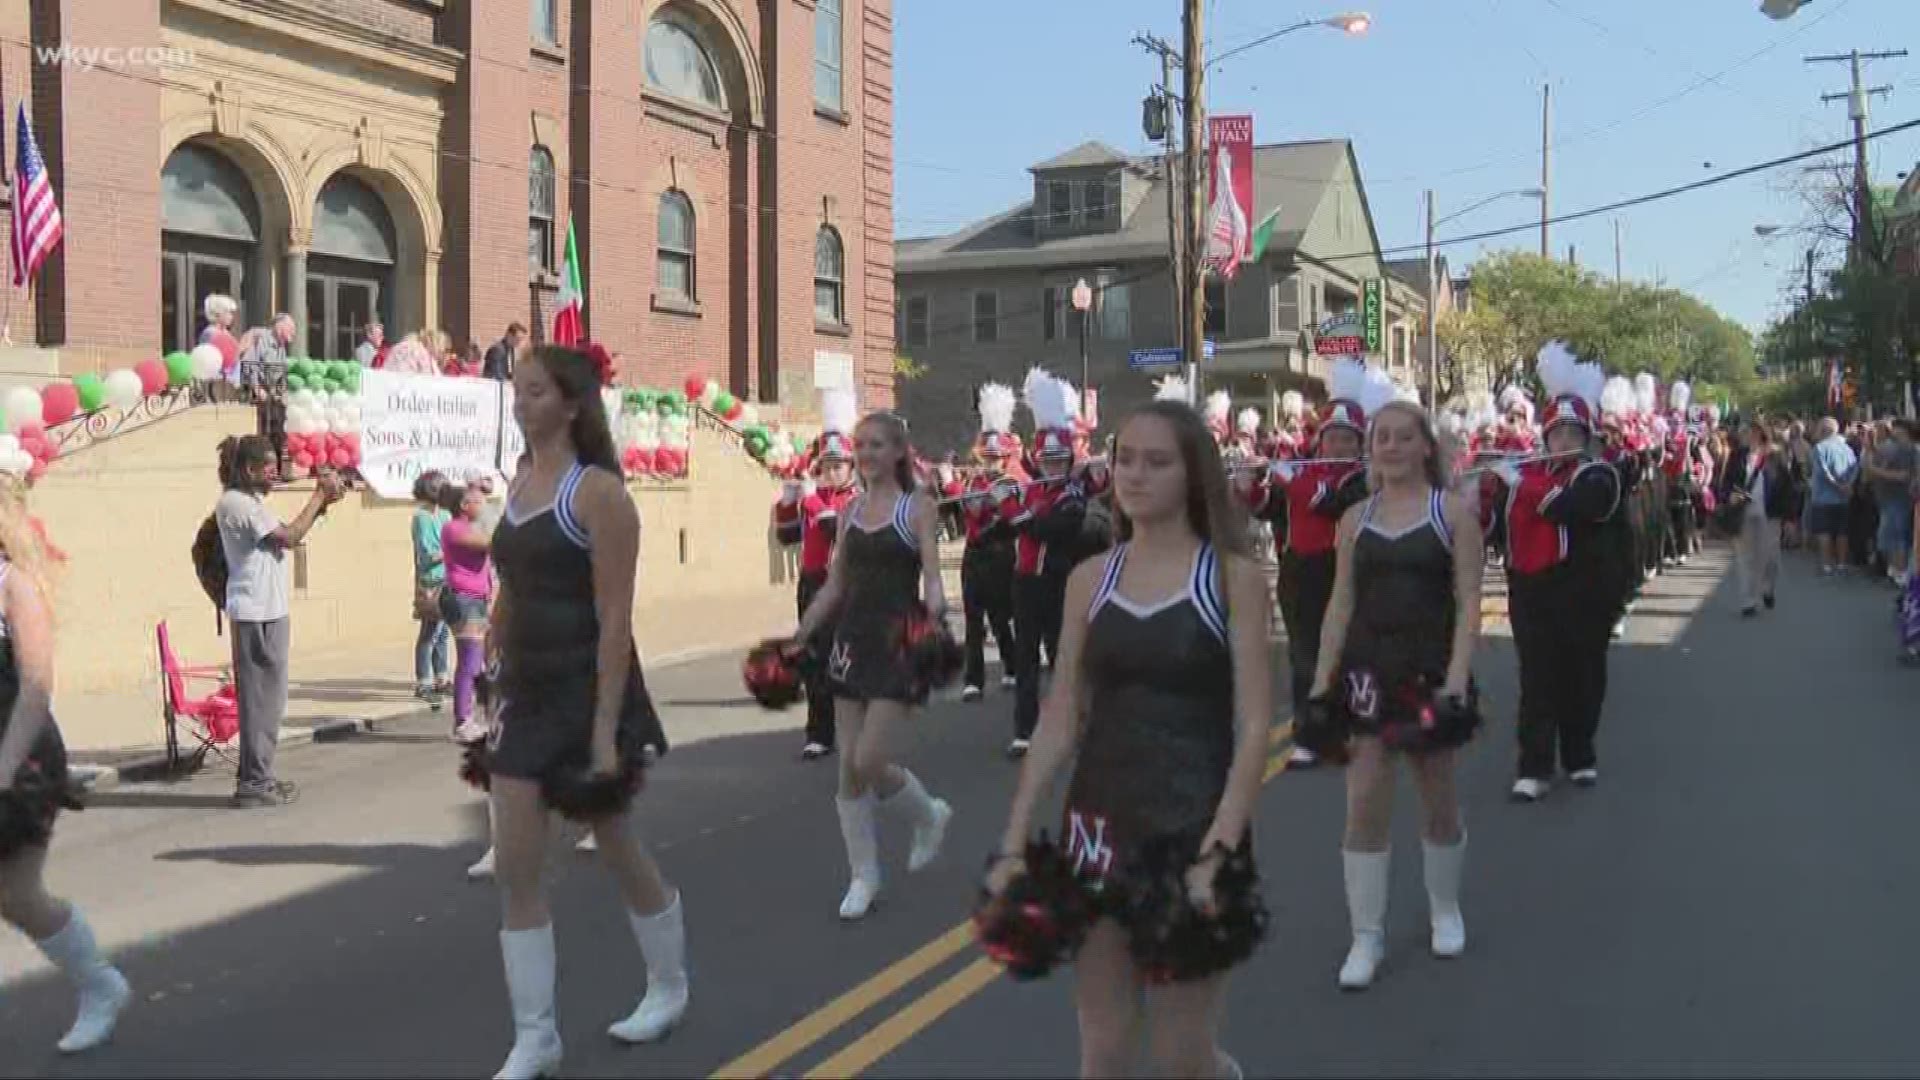 66th annual Columbus Day parade marched through little Italy 